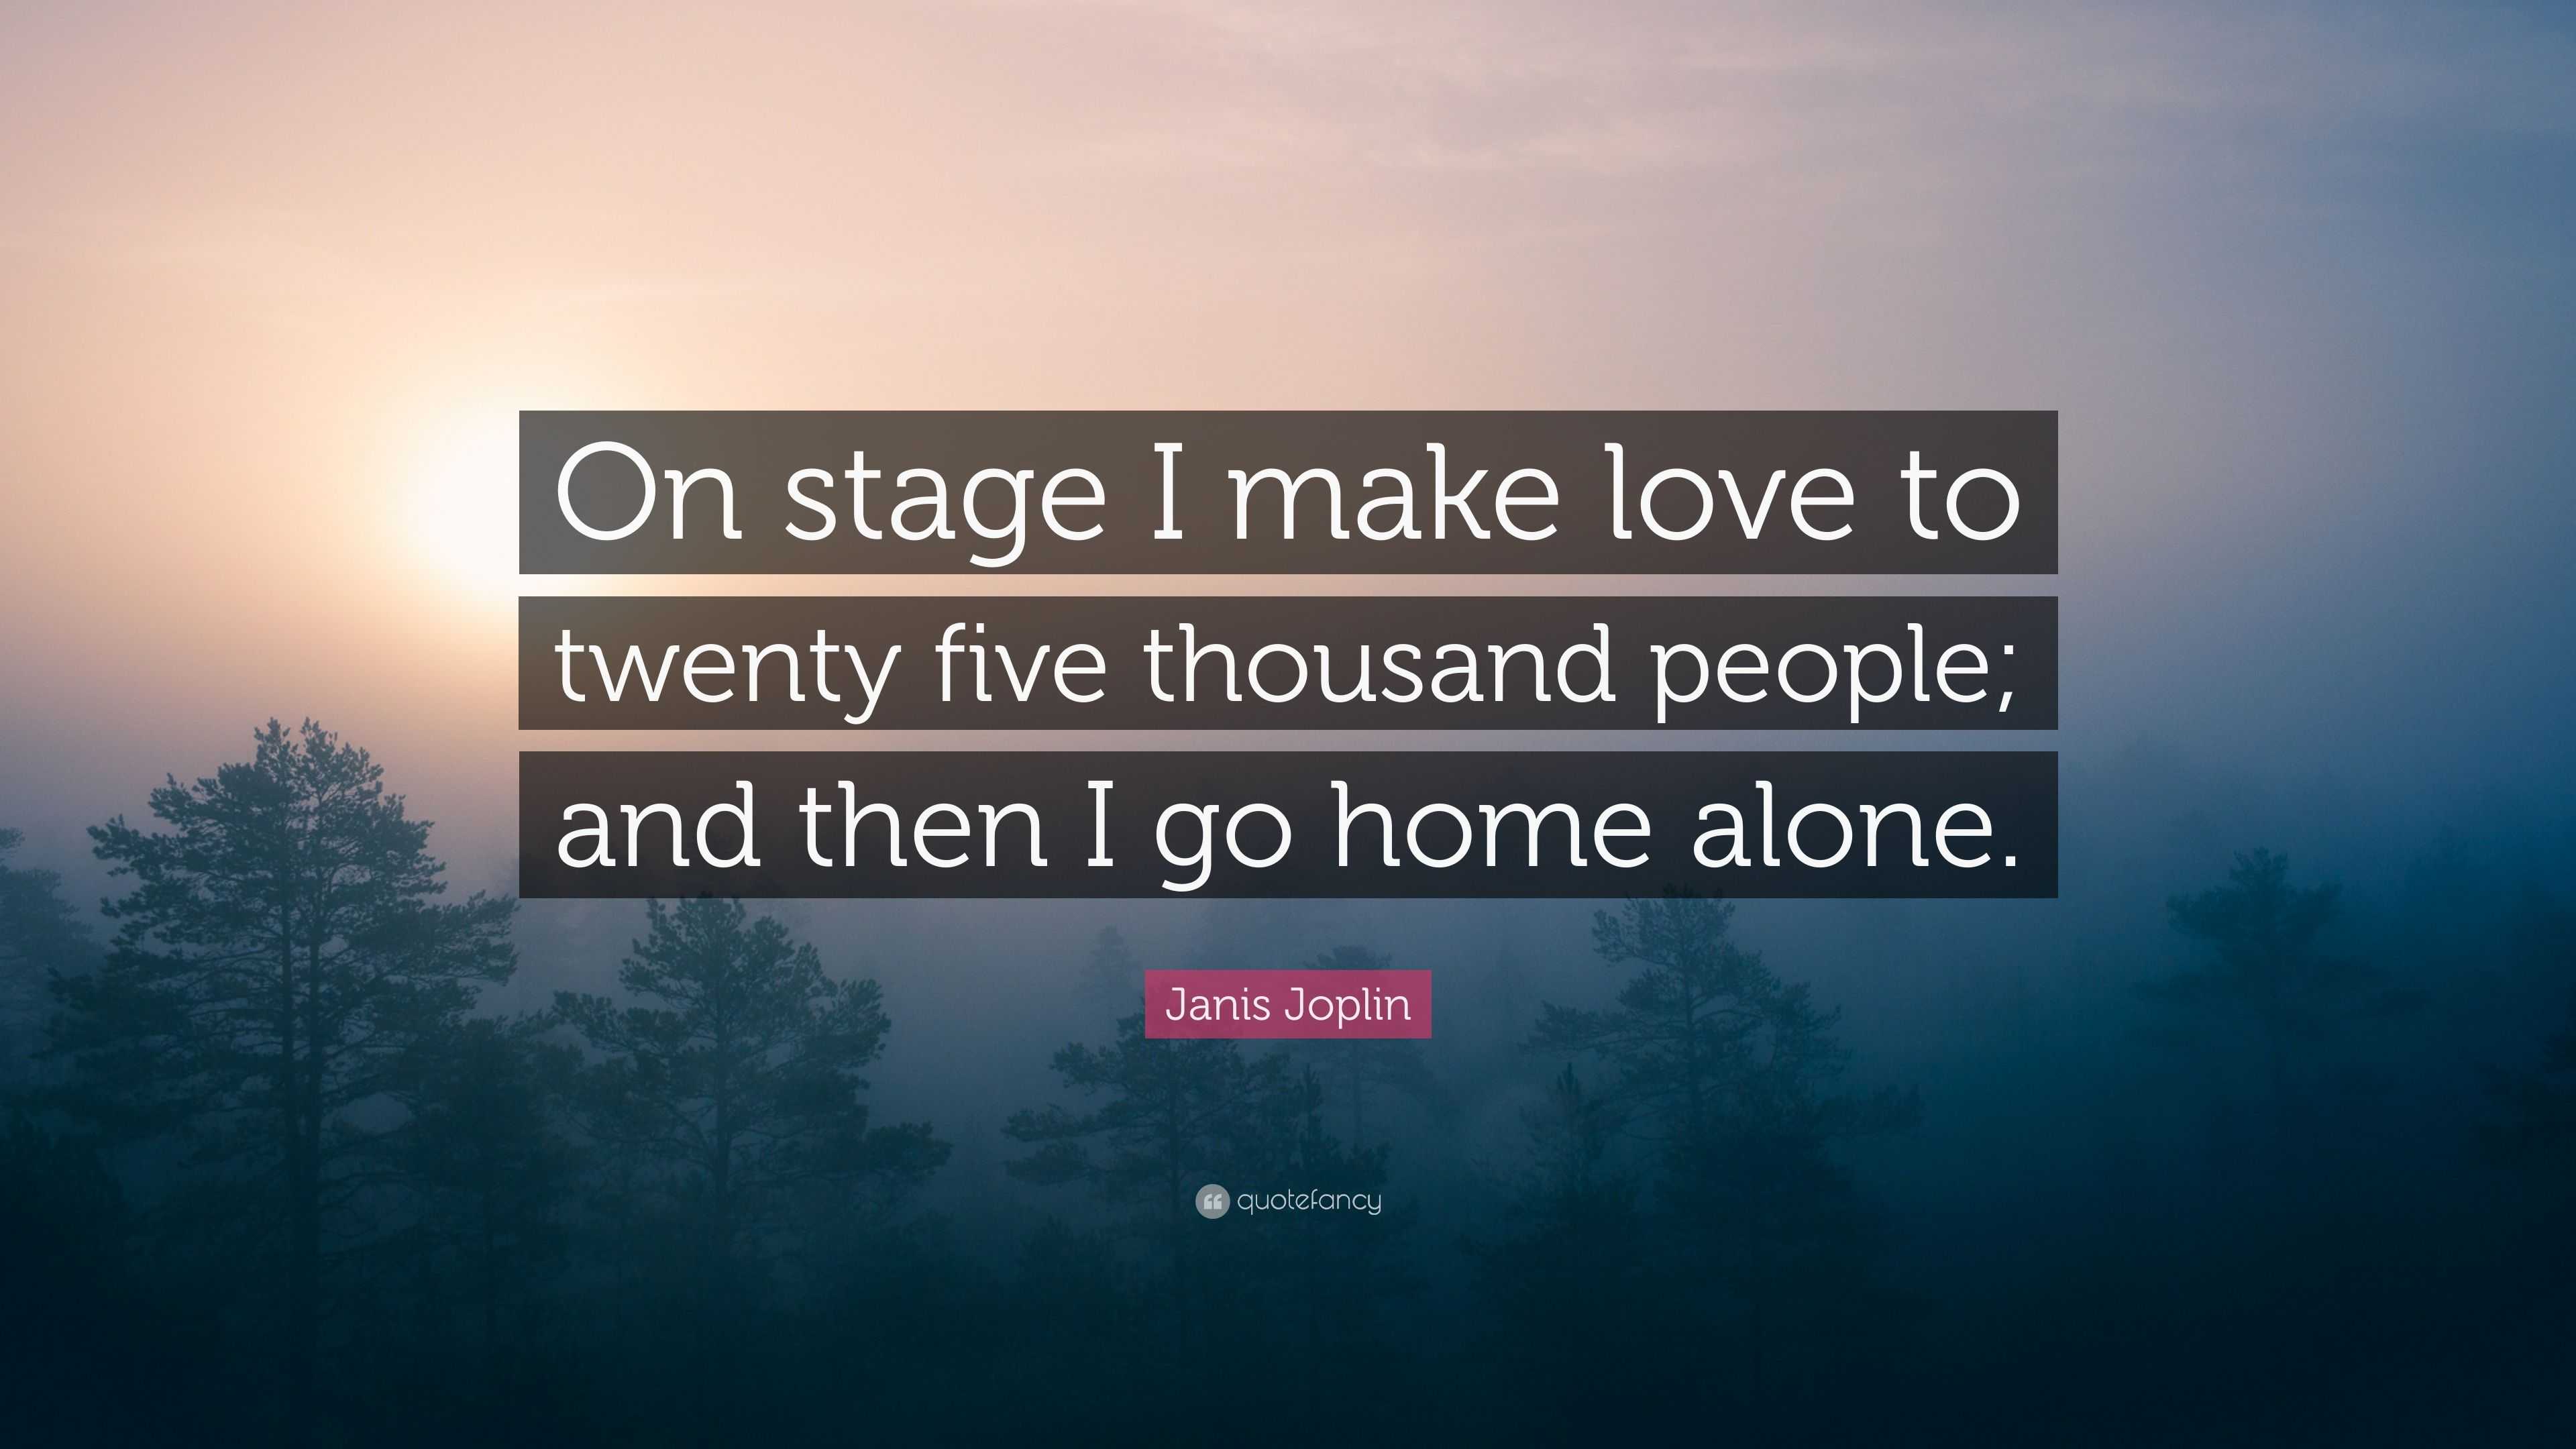 Janis Joplin Quote: "On stage I make love to twenty five thousand people; and then I go home ...